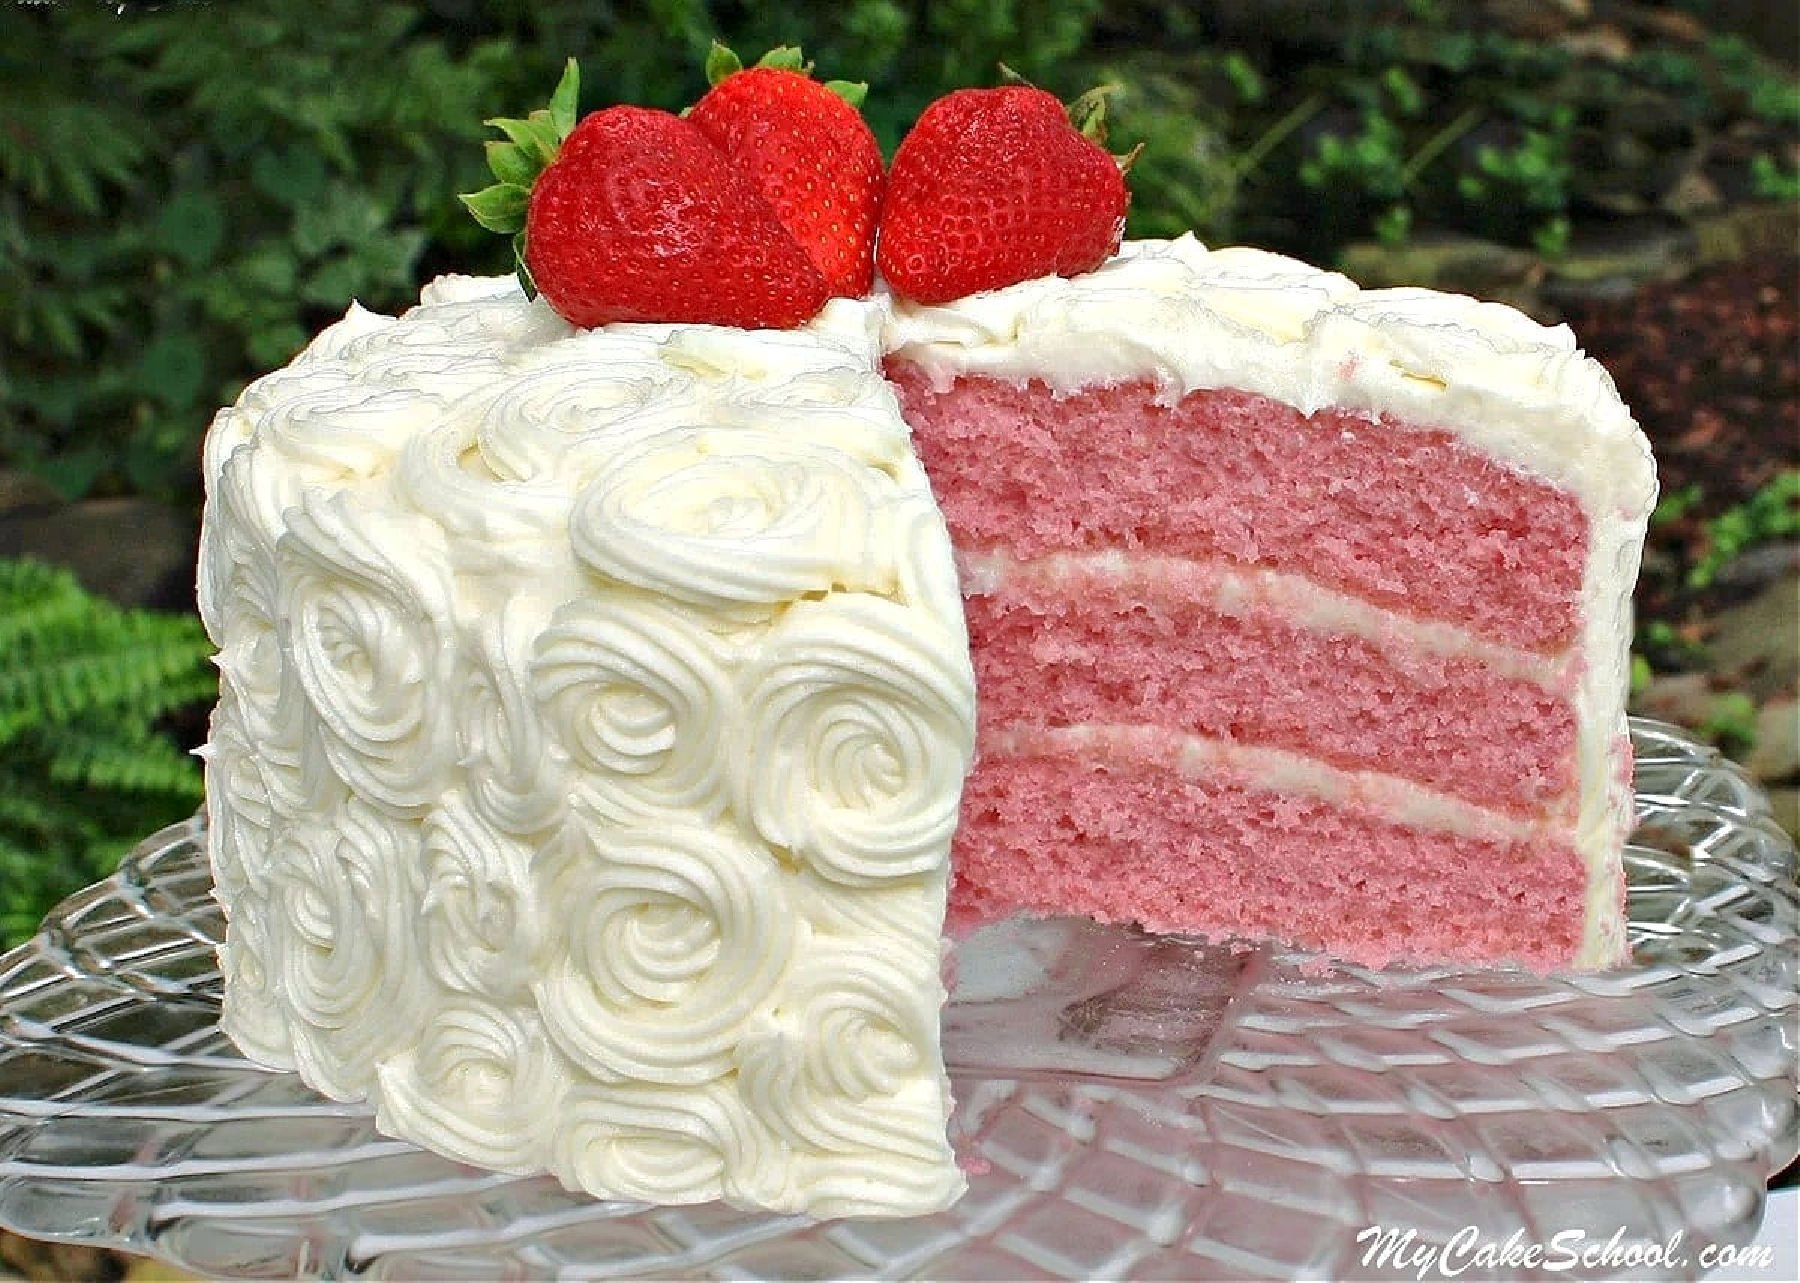 Sliced strawberry cake from scratch on a glass pedestal.